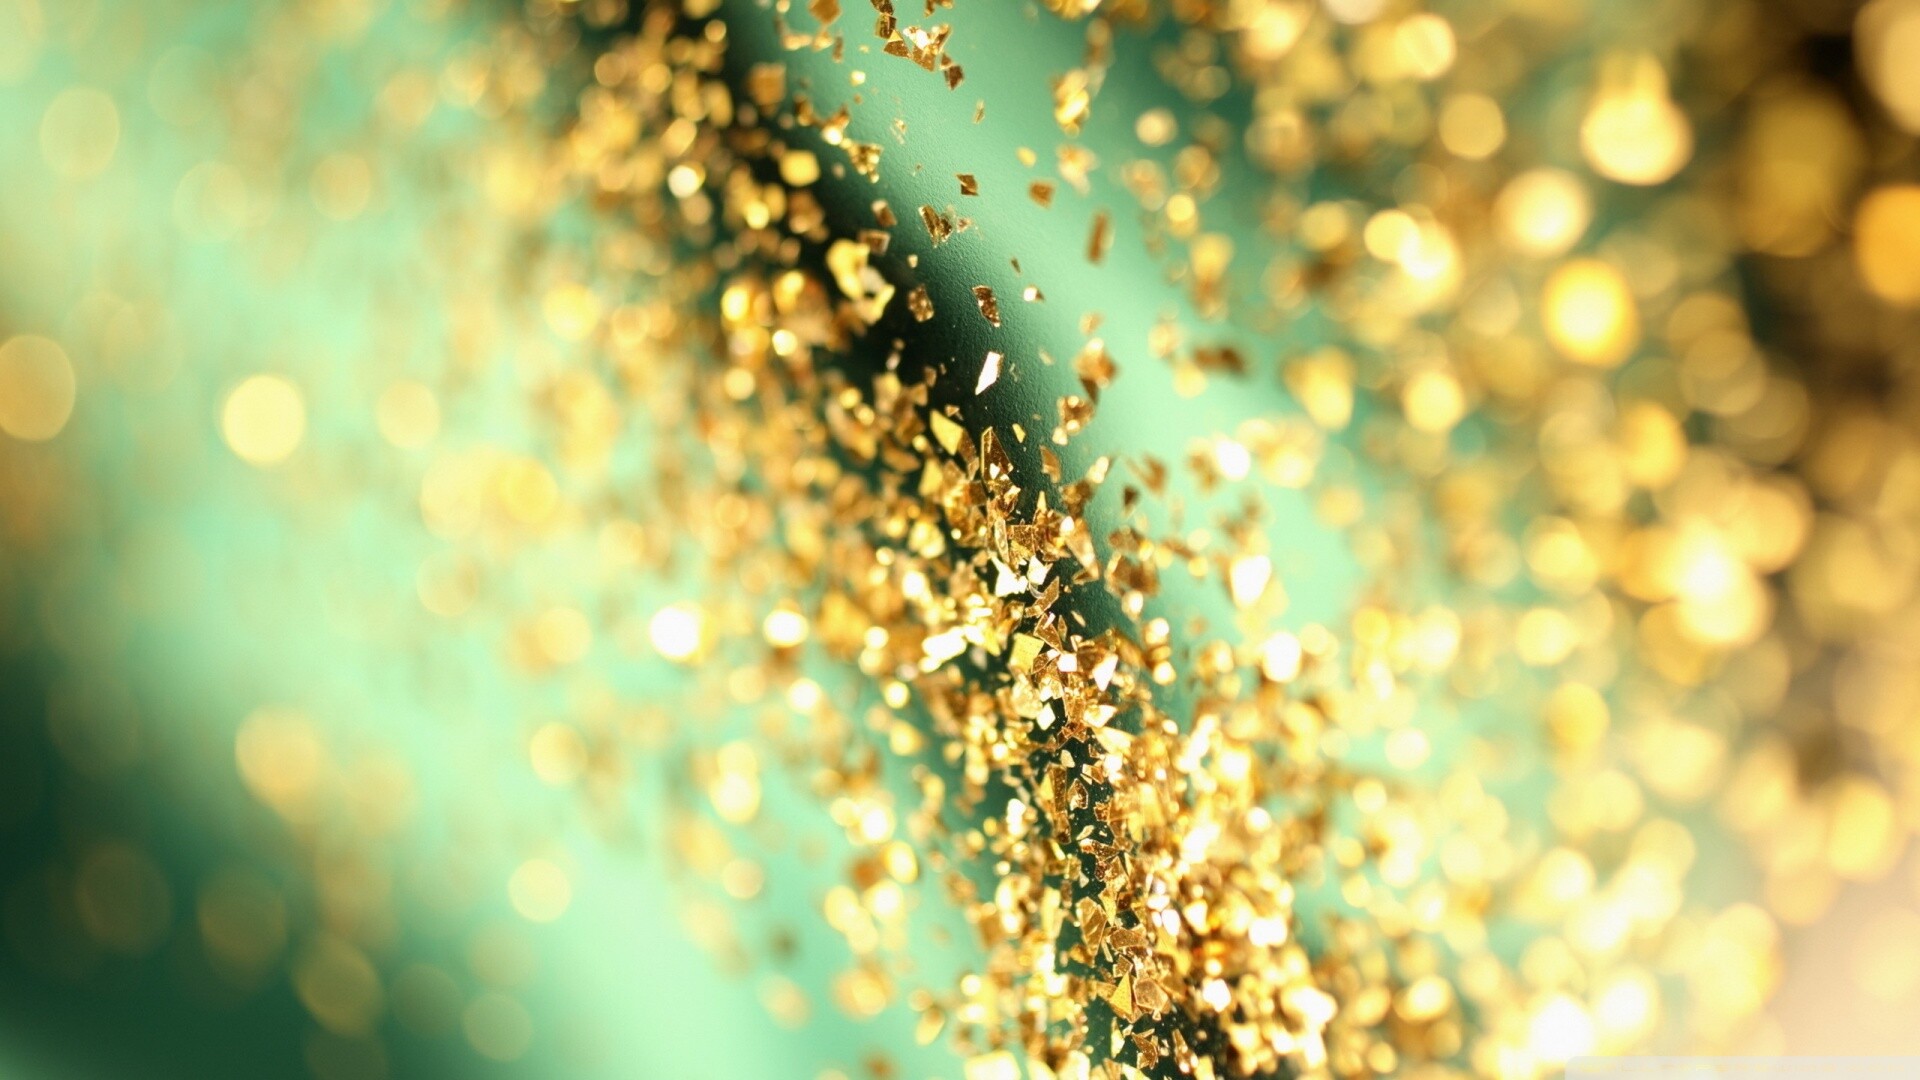 Gold Sparkle: Gold glitter, Bokeh, Gold blurry lights, The effect of a soft out-of-focus background. 1920x1080 Full HD Background.